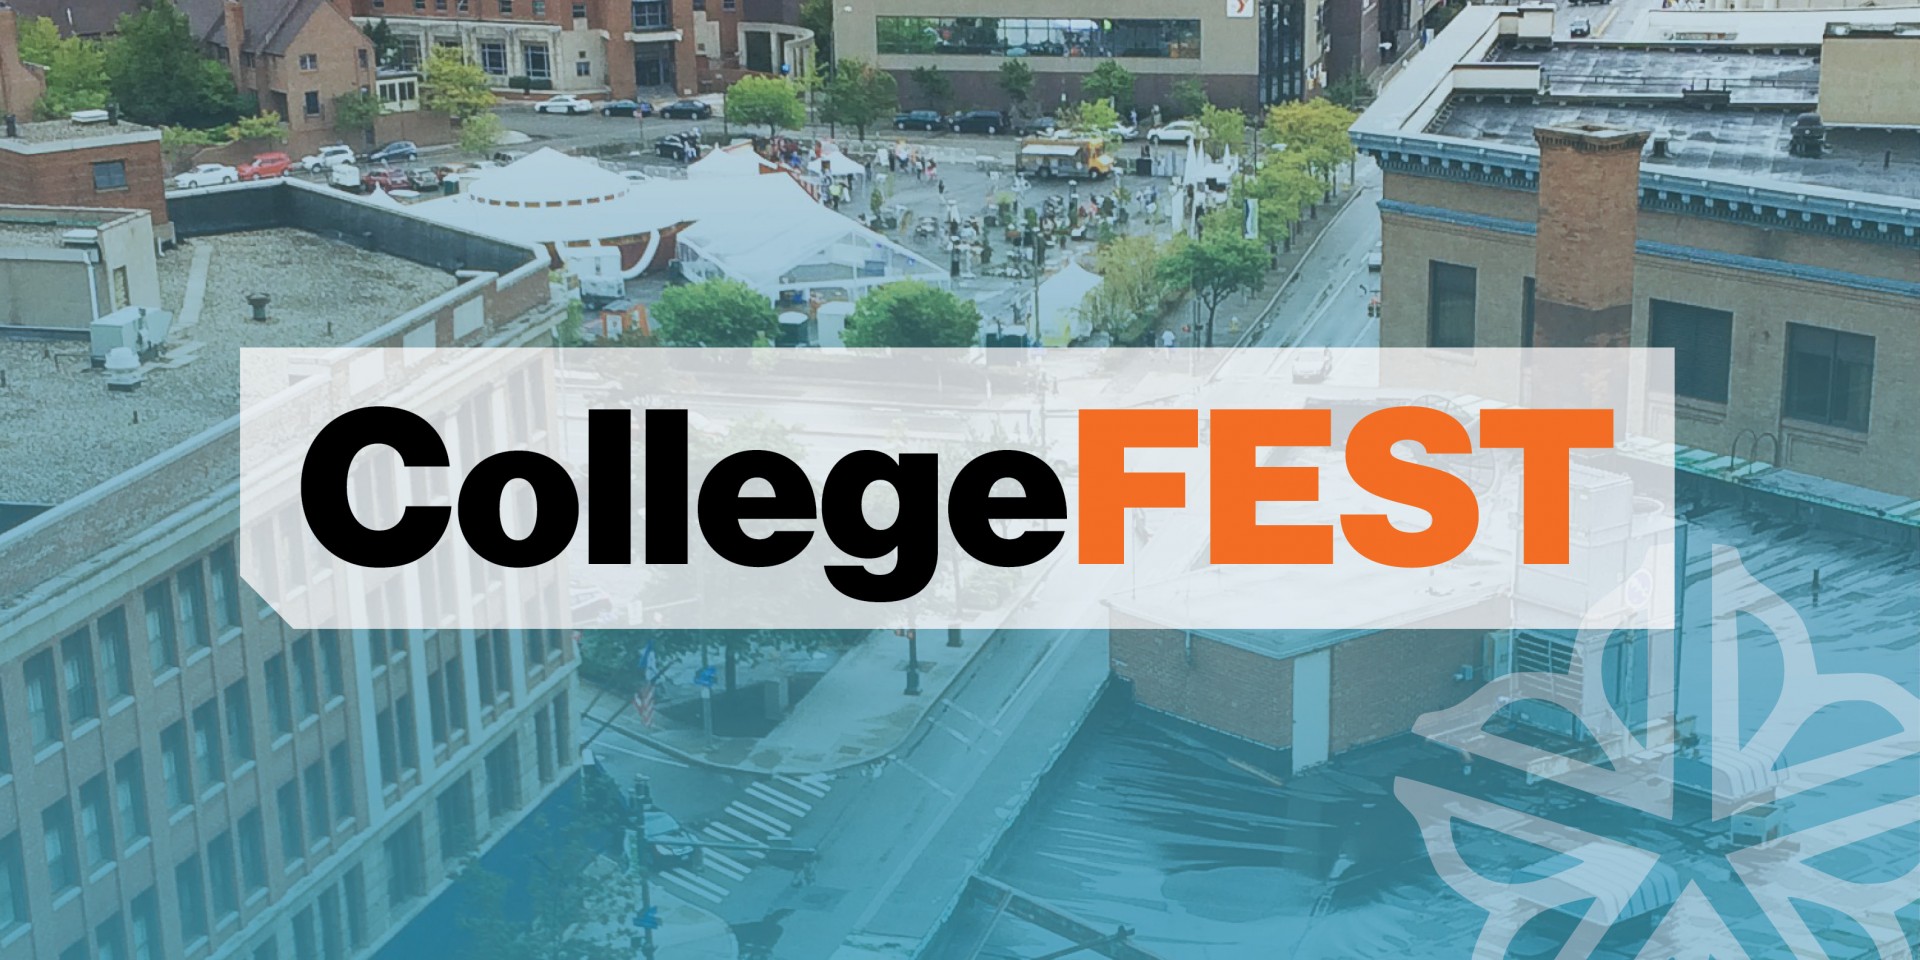 In the foreground, the word College Fest fills the center of the image. Behind this, an aerial image of a city block in downtown Rochester with tents set up. In the bottom right corner of the image is the Rochester flower logo.